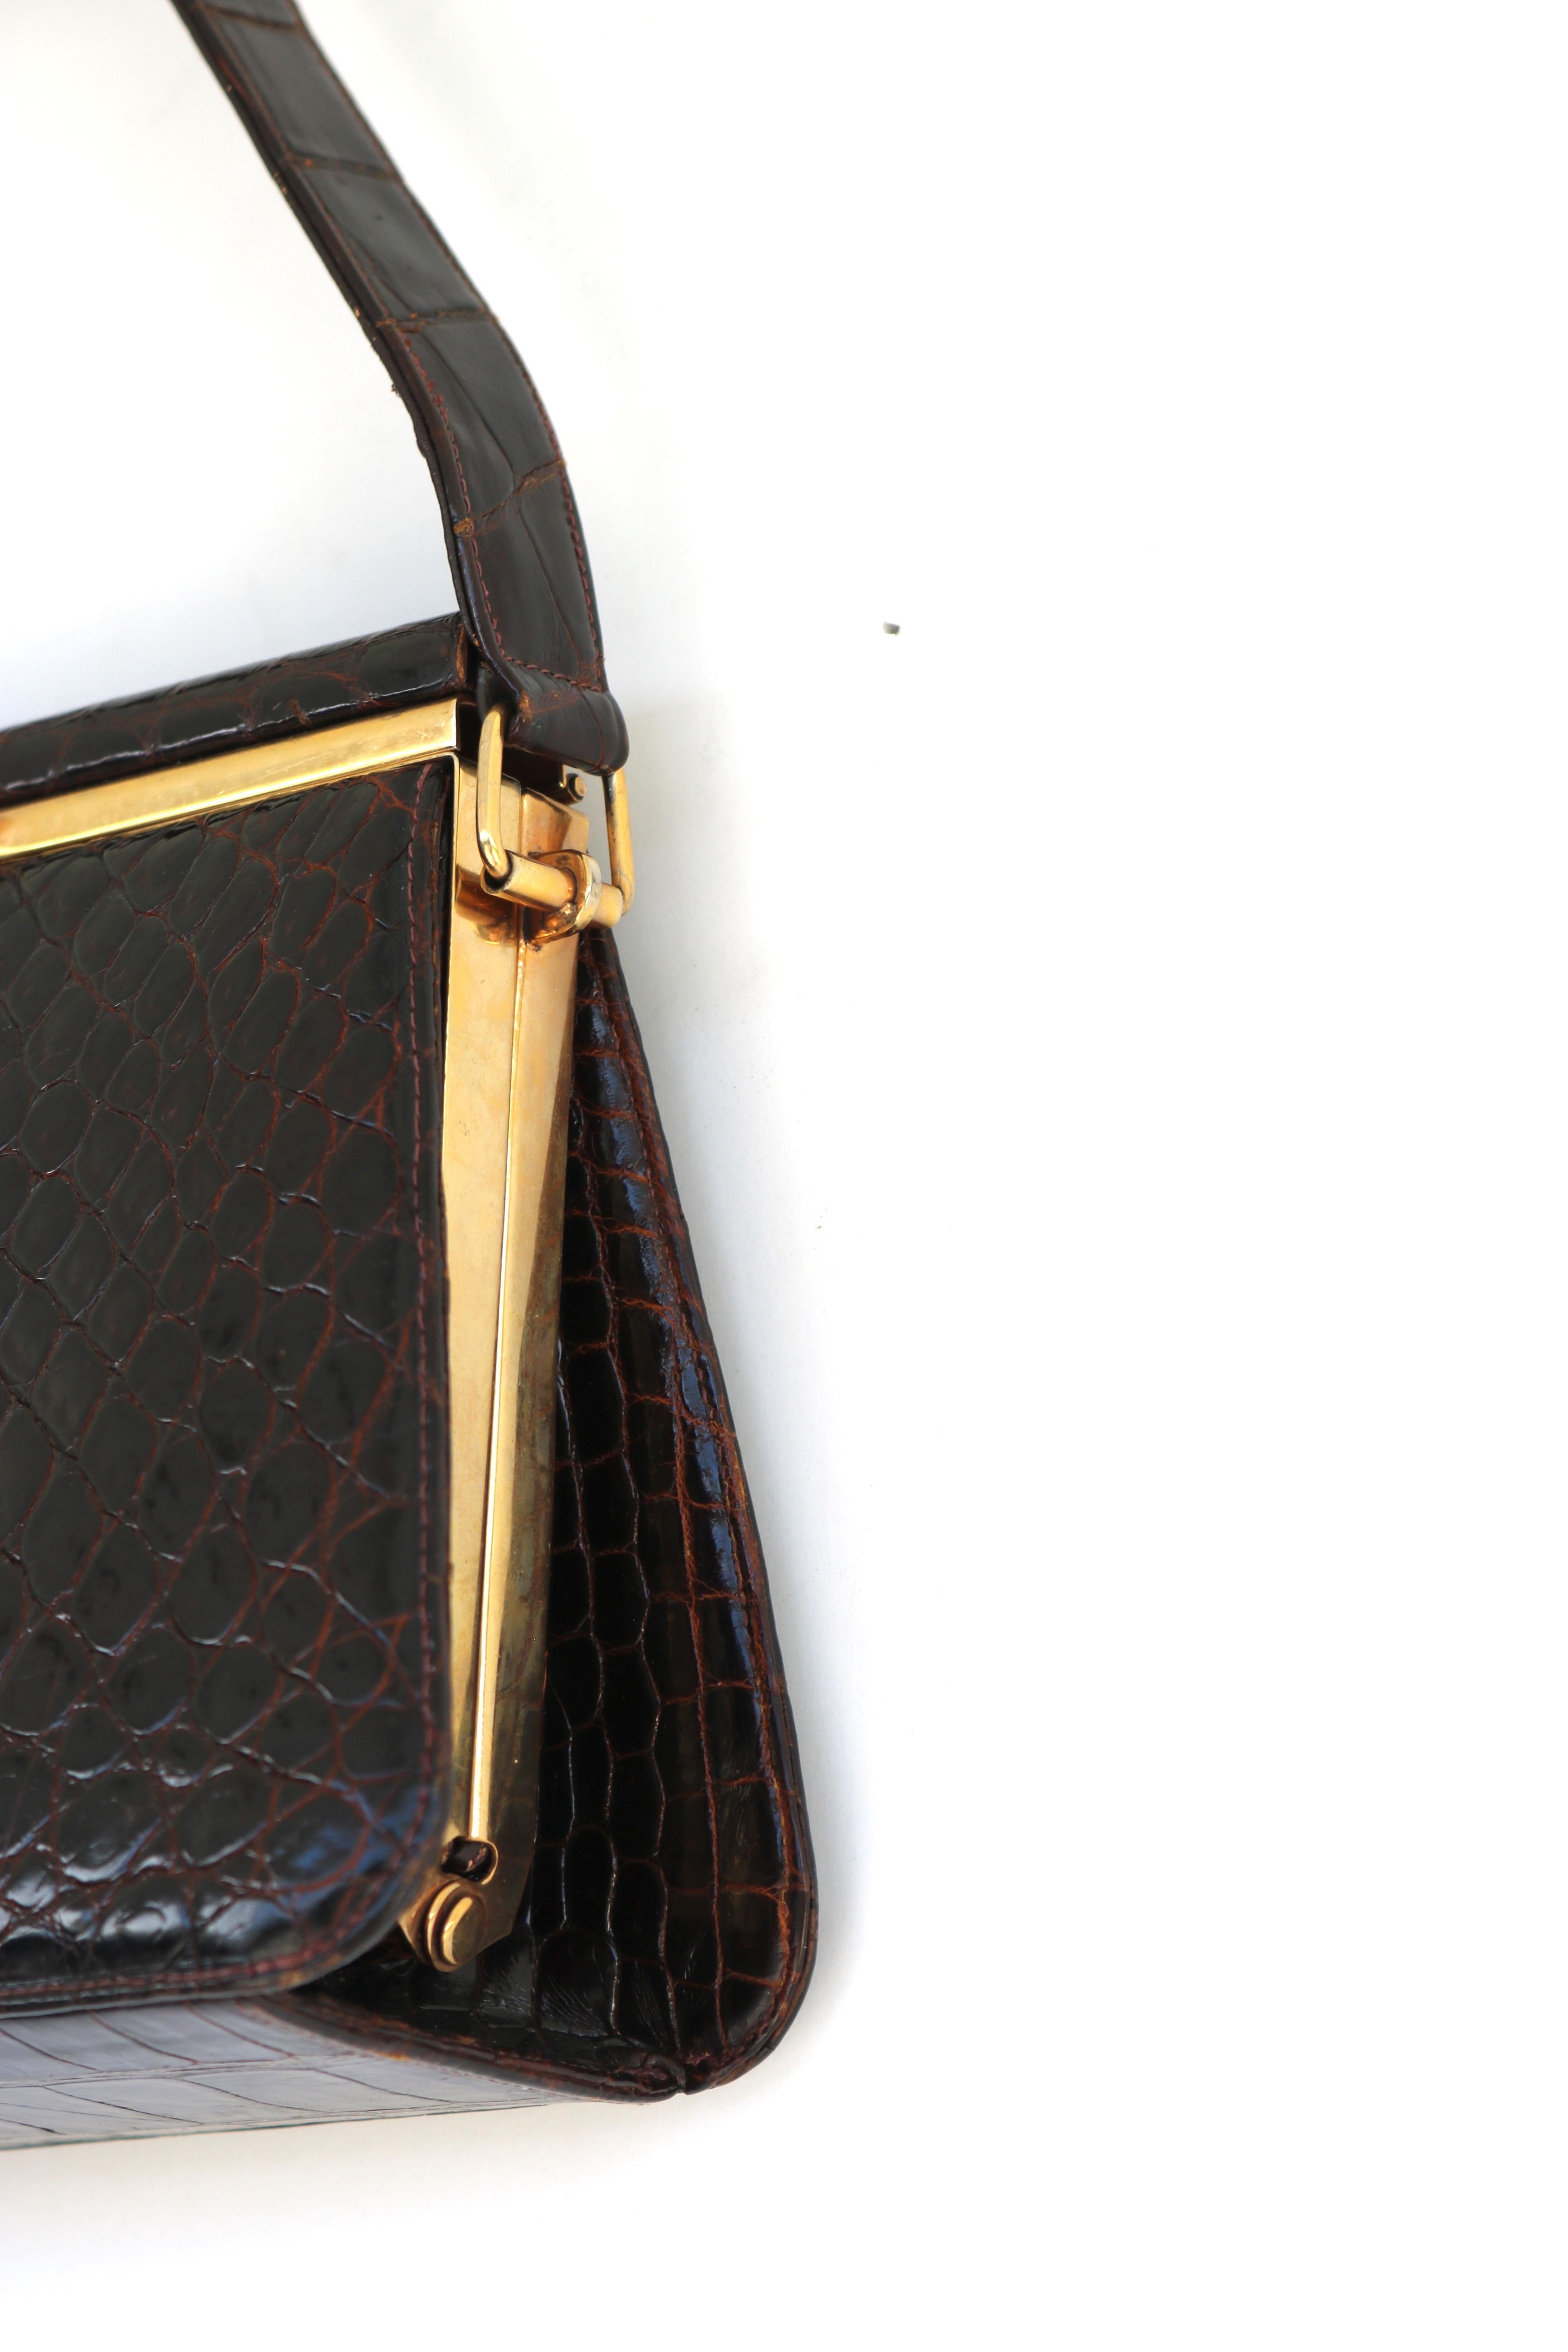 Exquisite Small Flip Top Crocodile Handbag-Gold Plated Frame For Sale 1